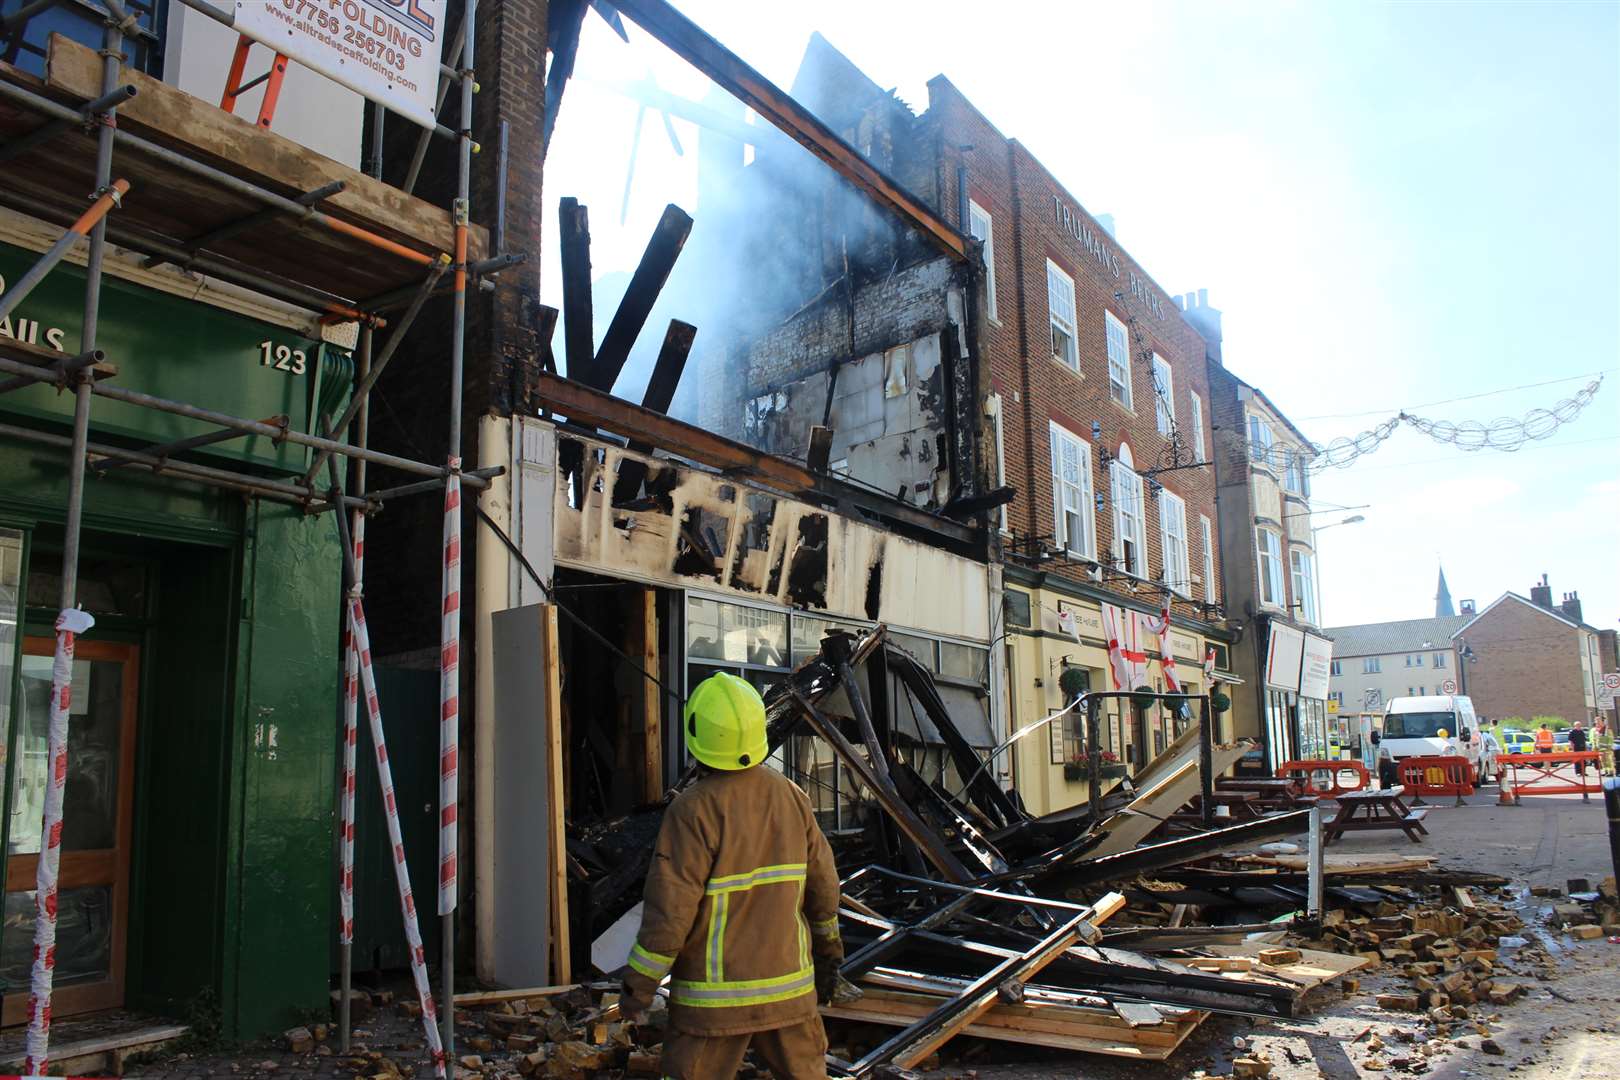 The building was destroyed in the early-morning Margate blaze